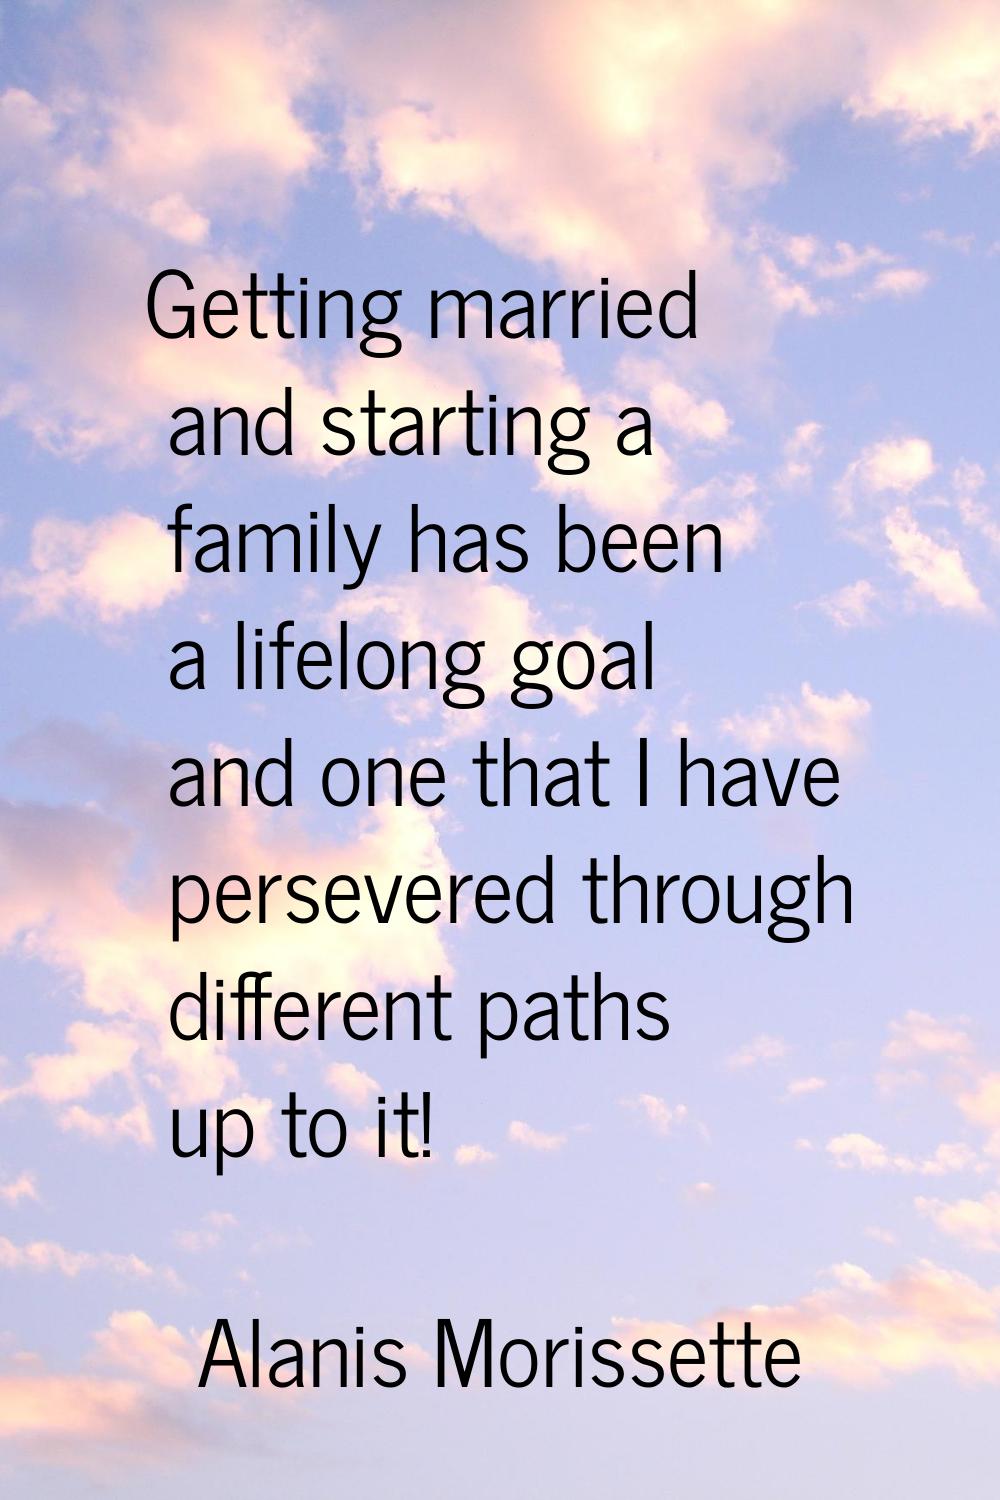 Getting married and starting a family has been a lifelong goal and one that I have persevered throu